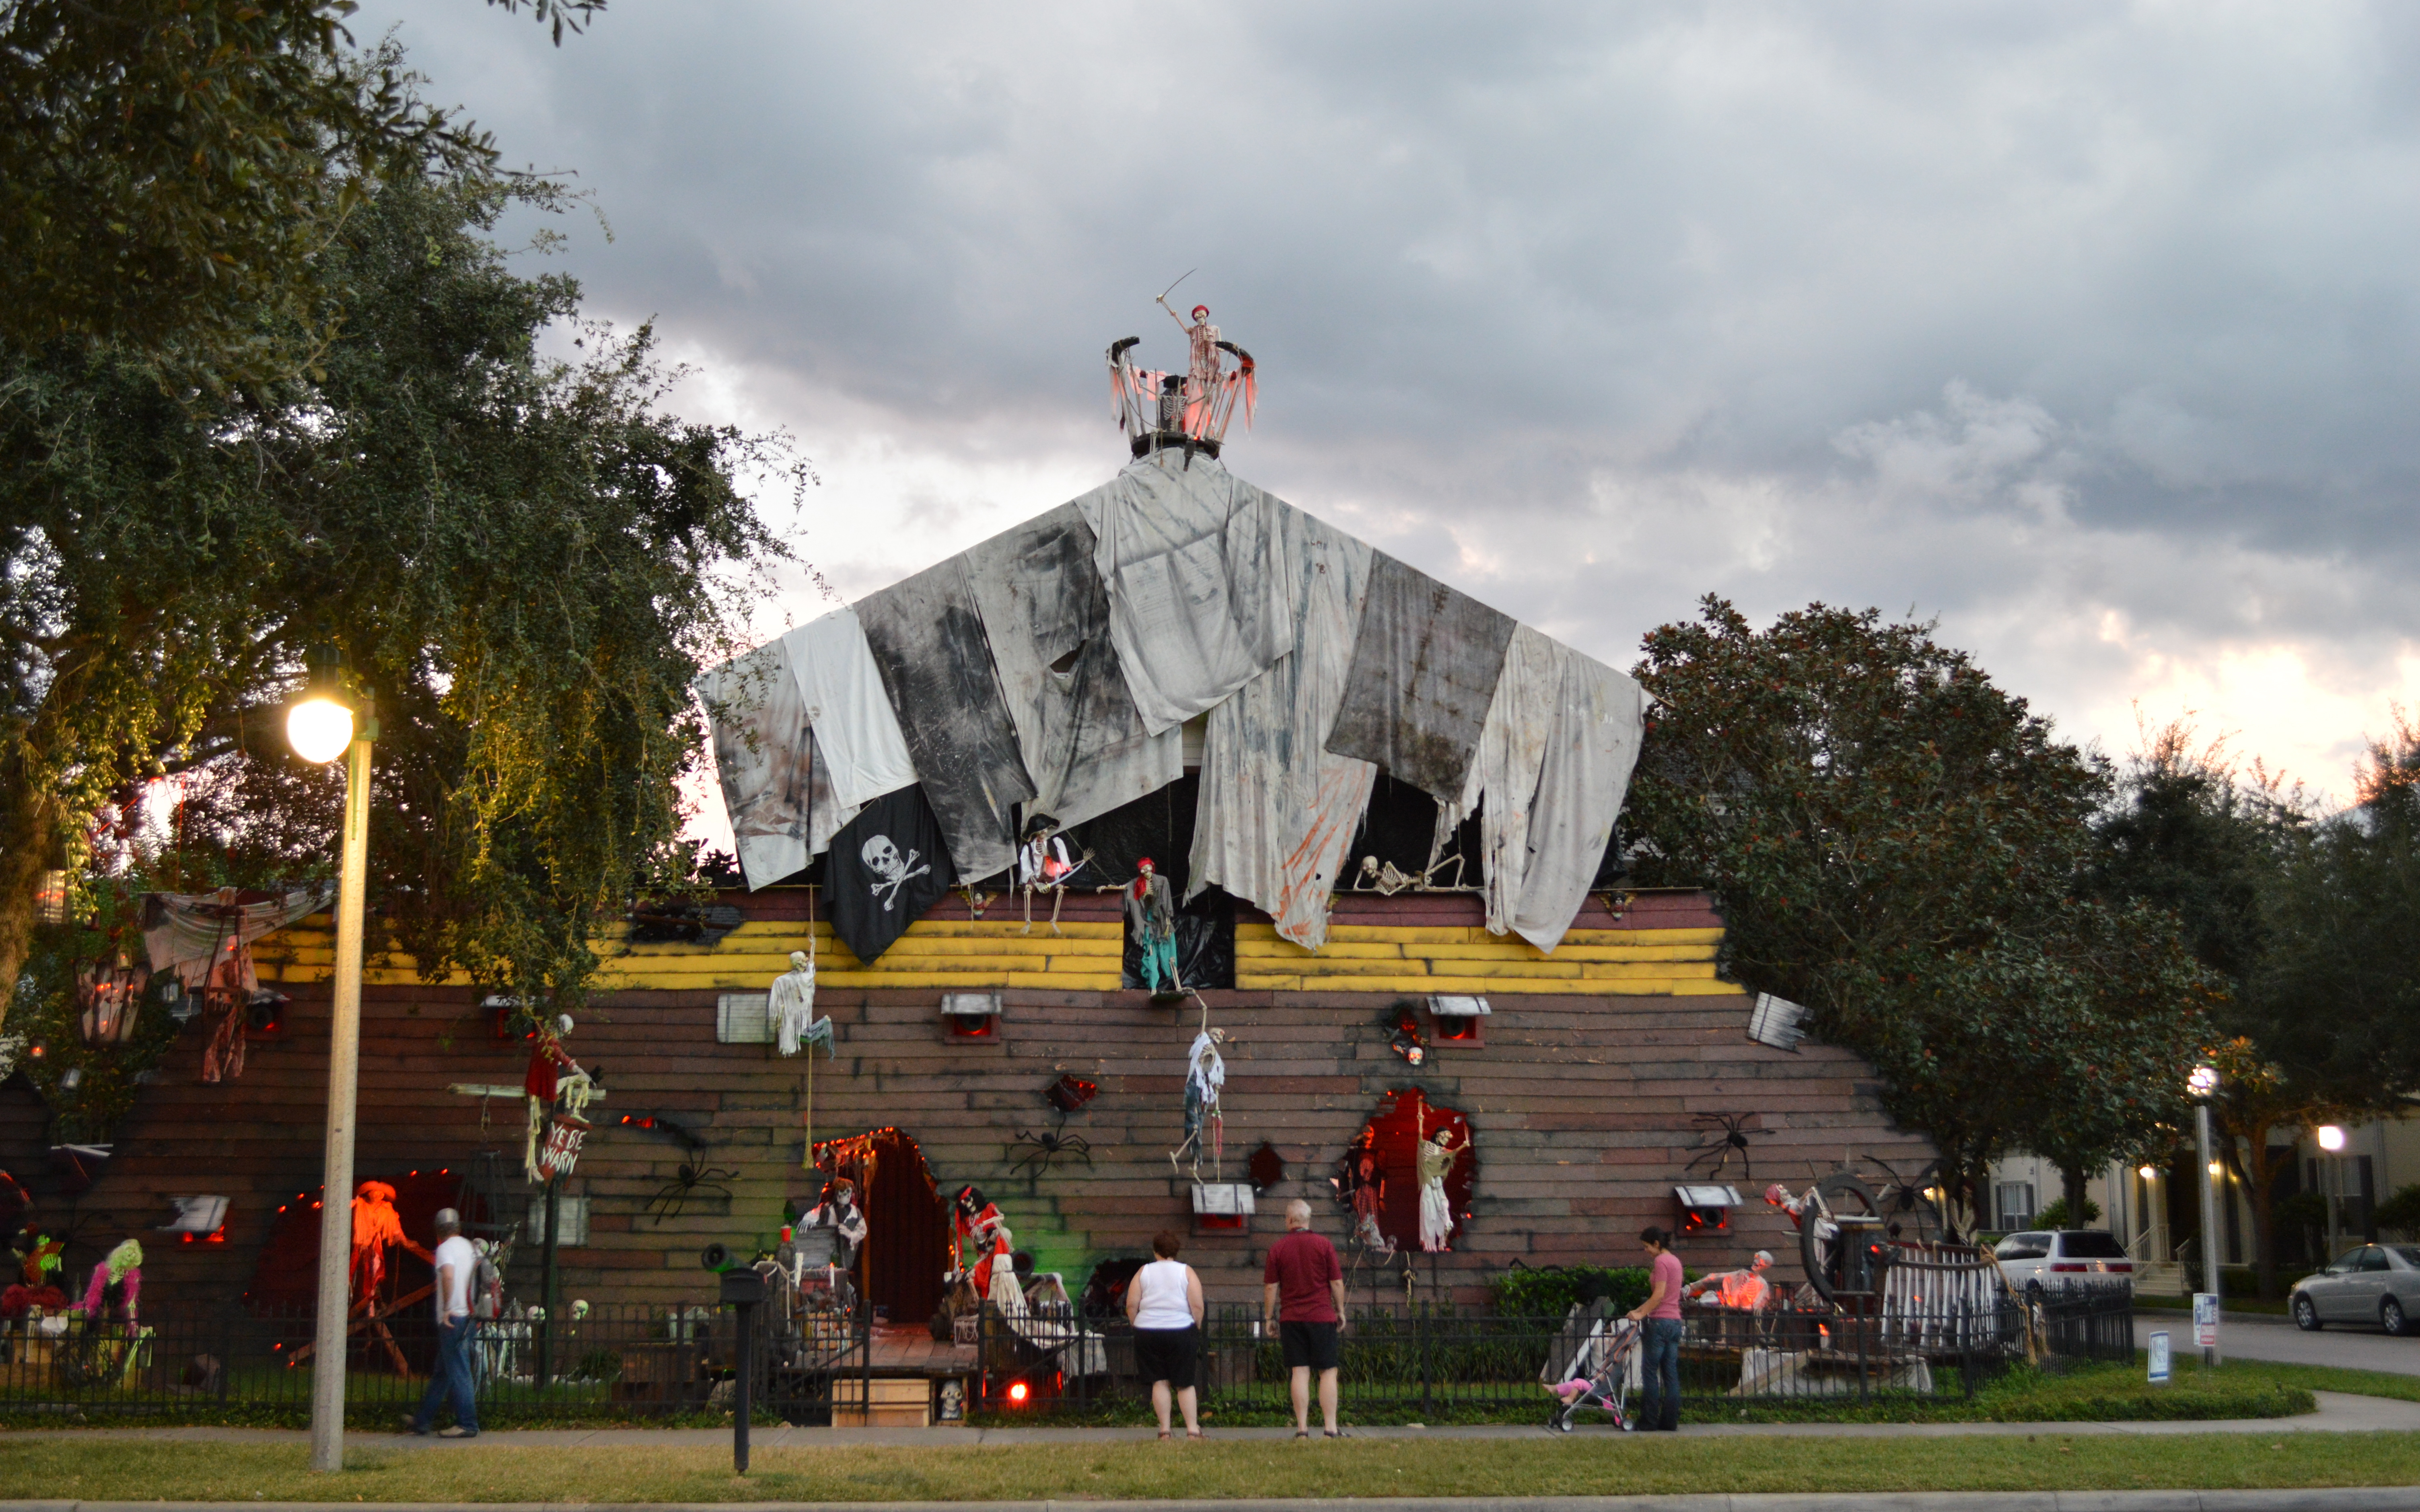 Haunted Pirate ship created on the front of a home in Celebration Florida for Halloween